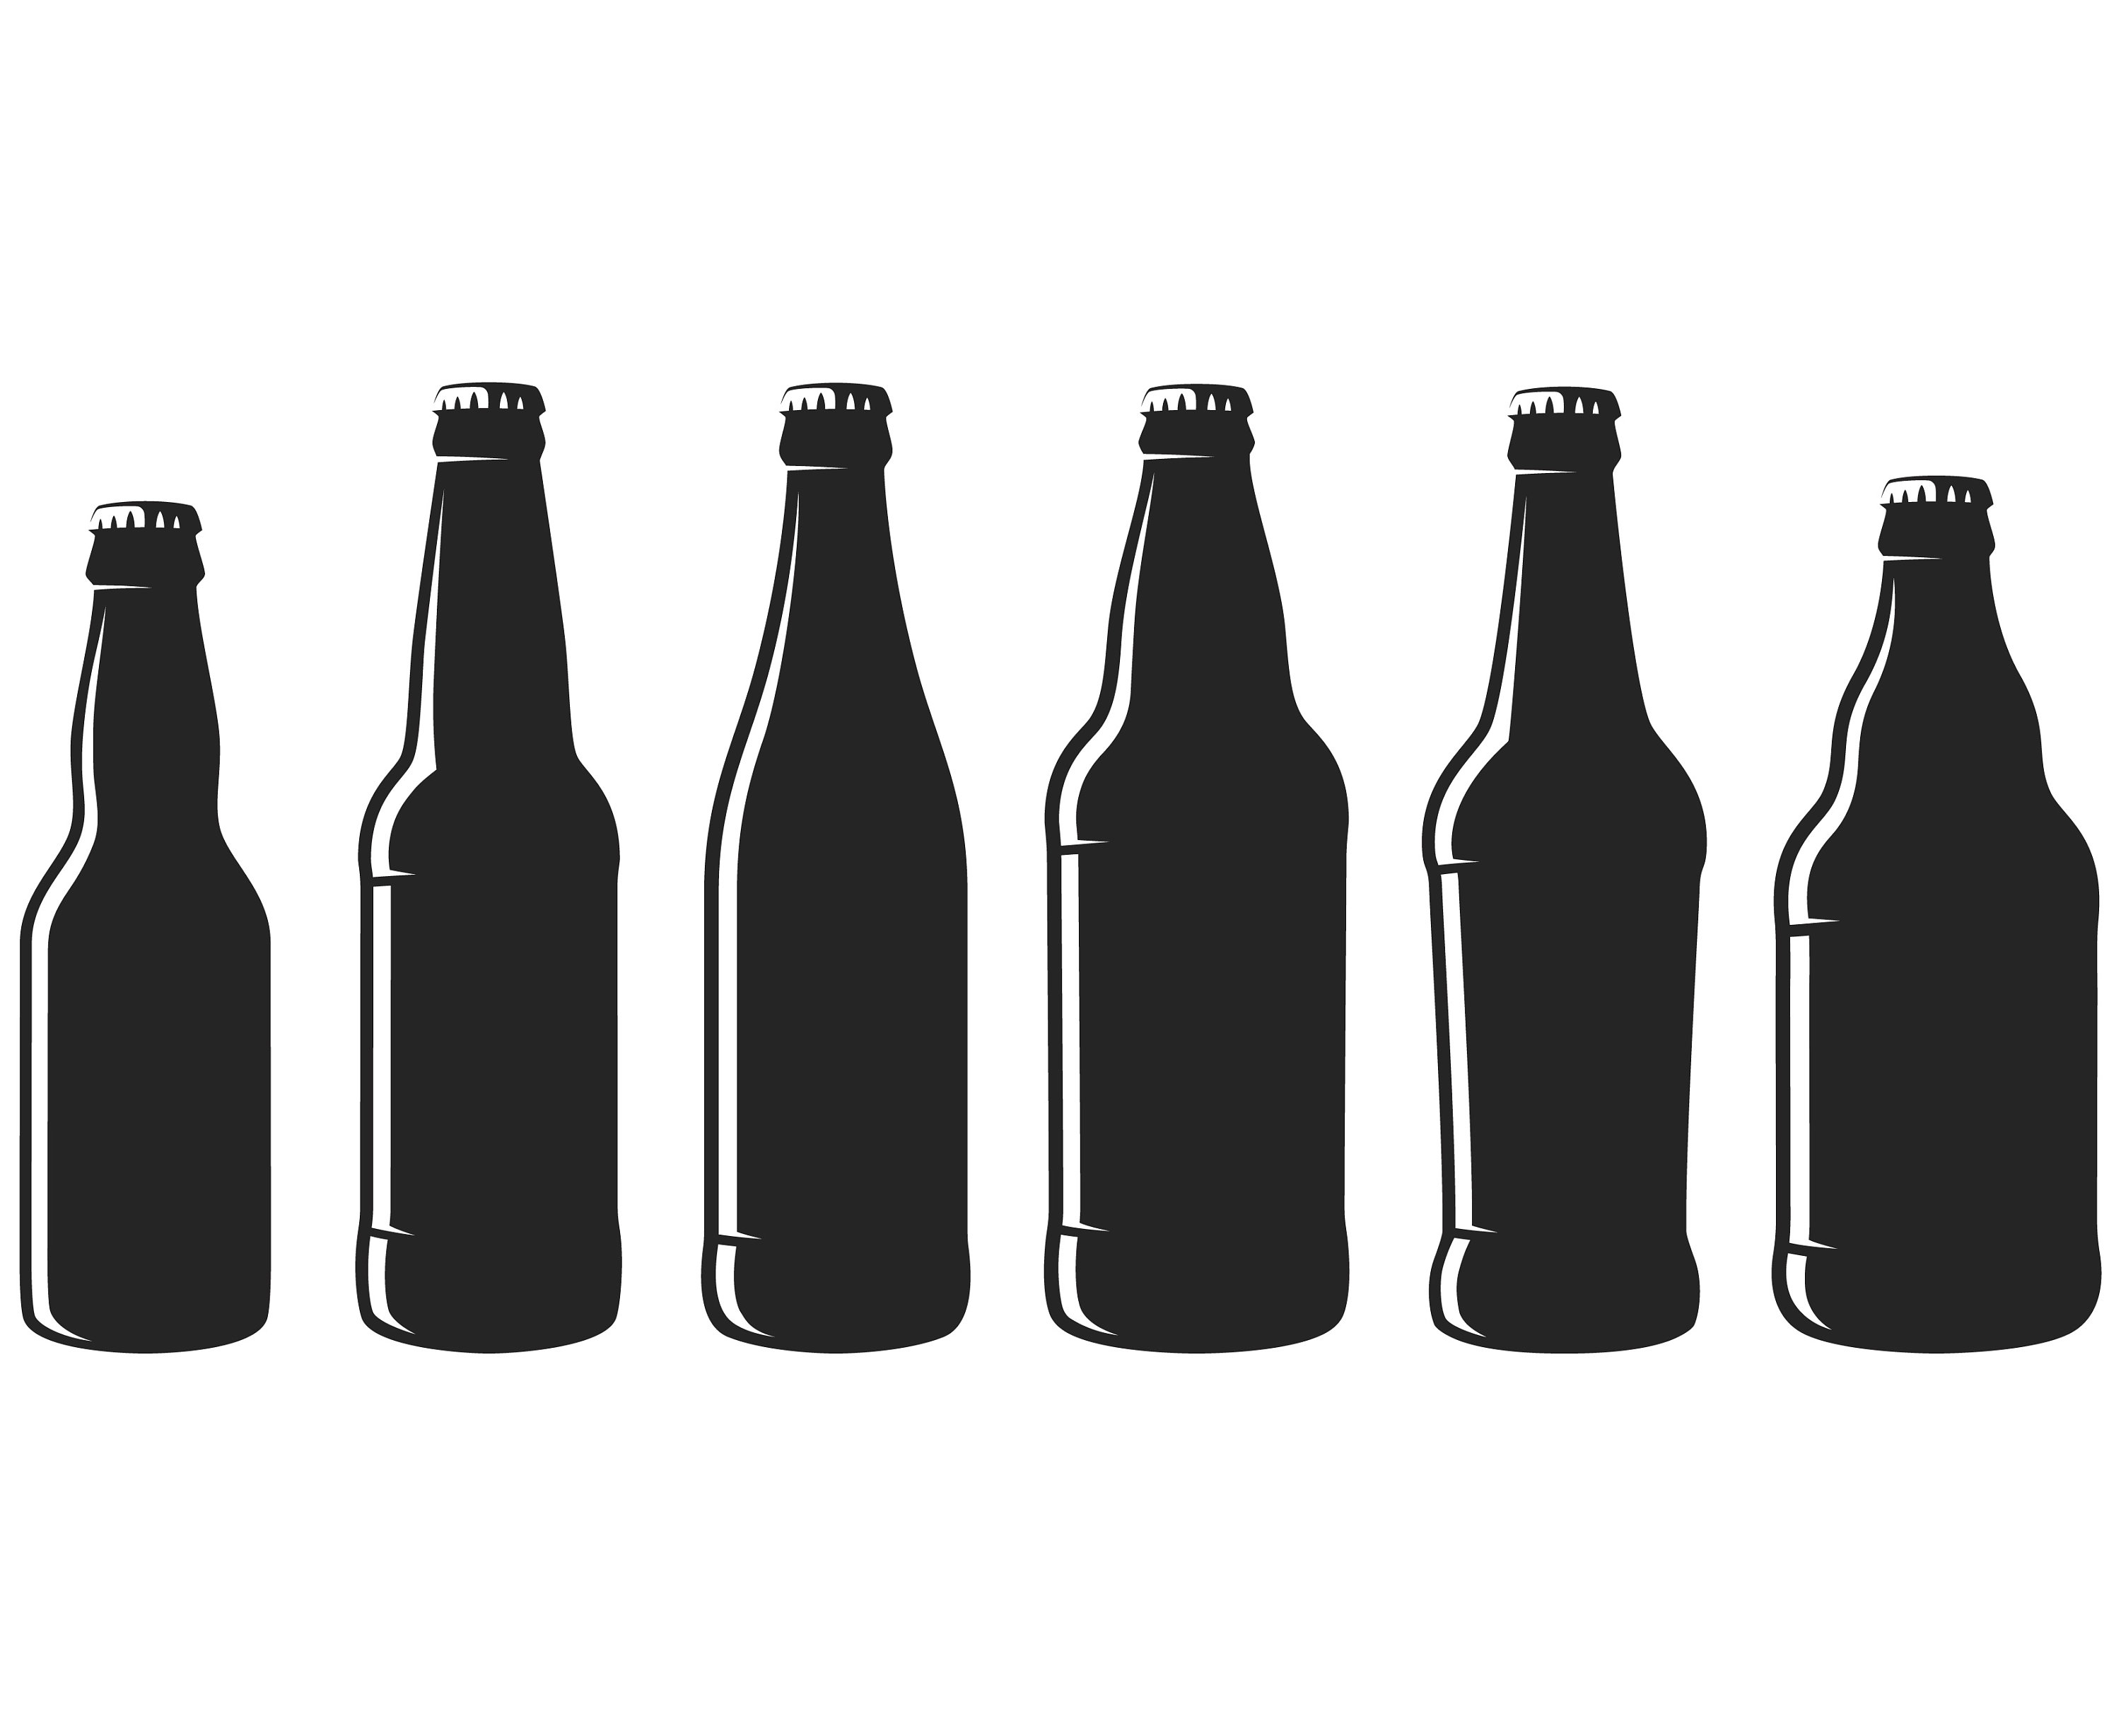 Beer Bottle Silhouette Vector At Collection Of Beer Bottle Silhouette Vector